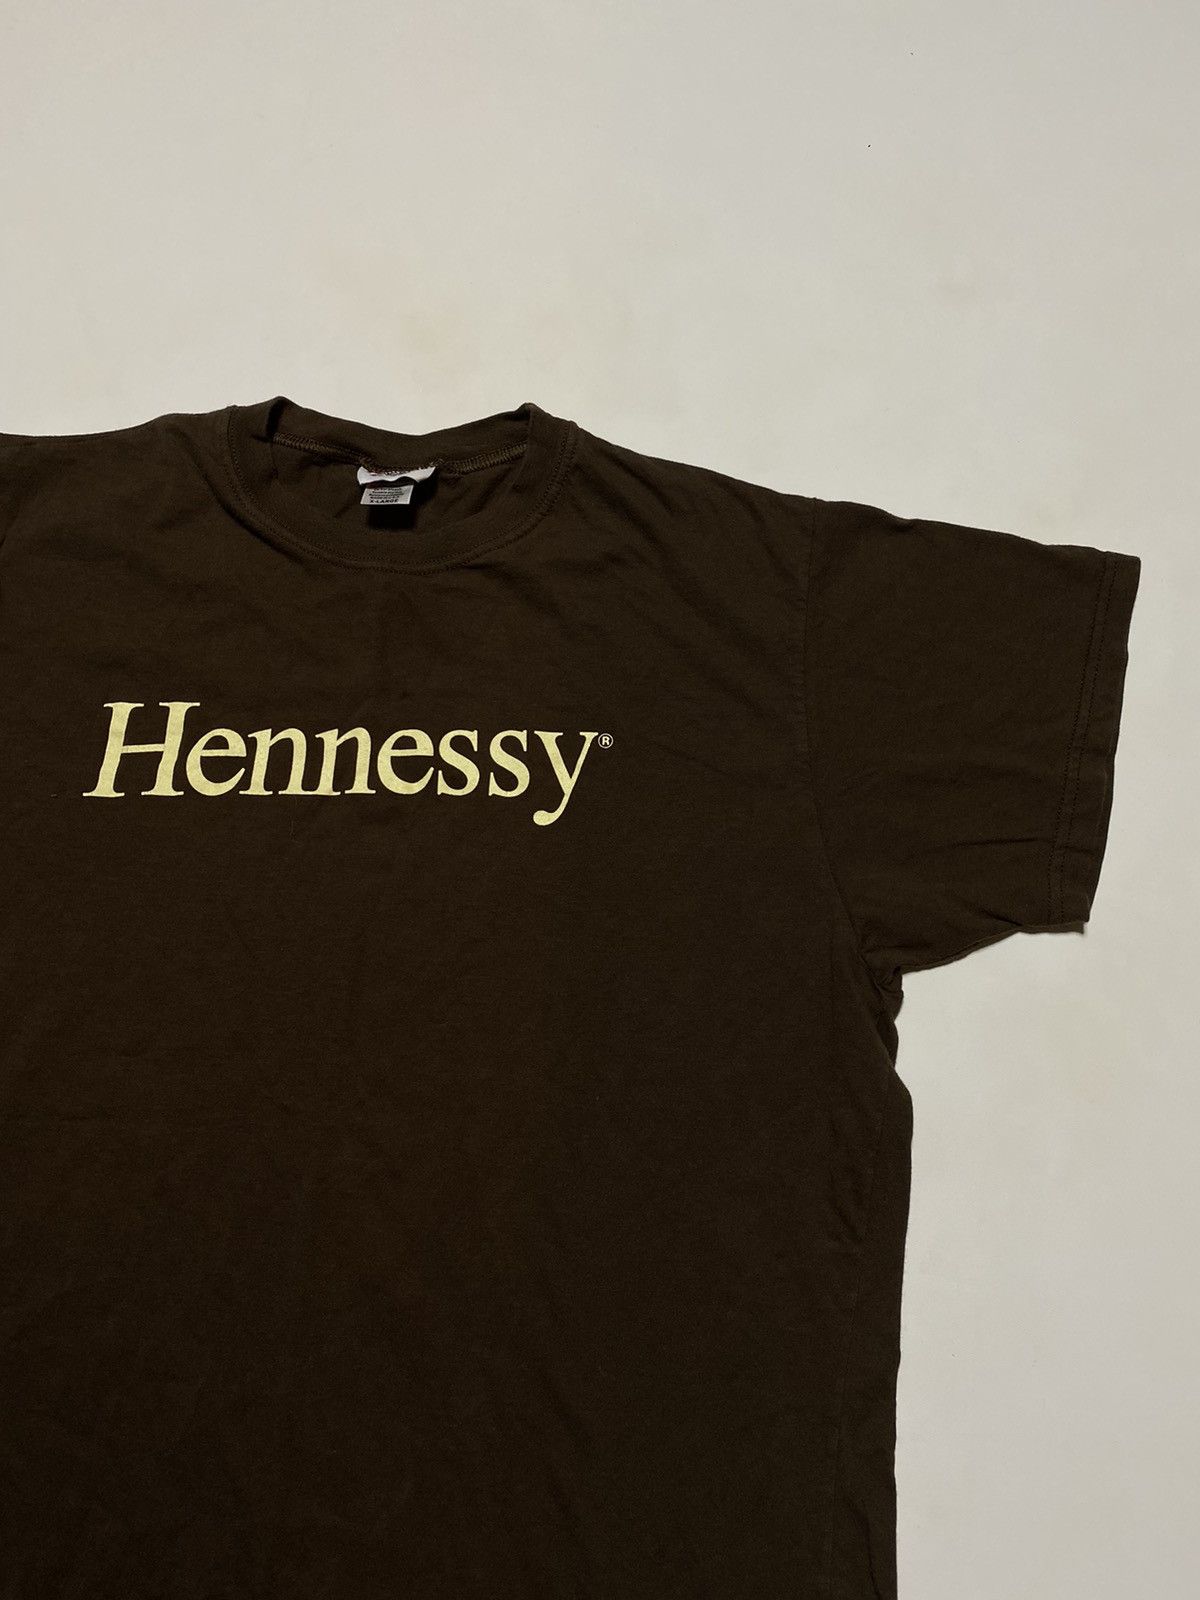 Hennessy Vintage Hennessy Cognac T Shirt Size XL Made IN USA Size US XL / EU 56 / 4 - 6 Thumbnail